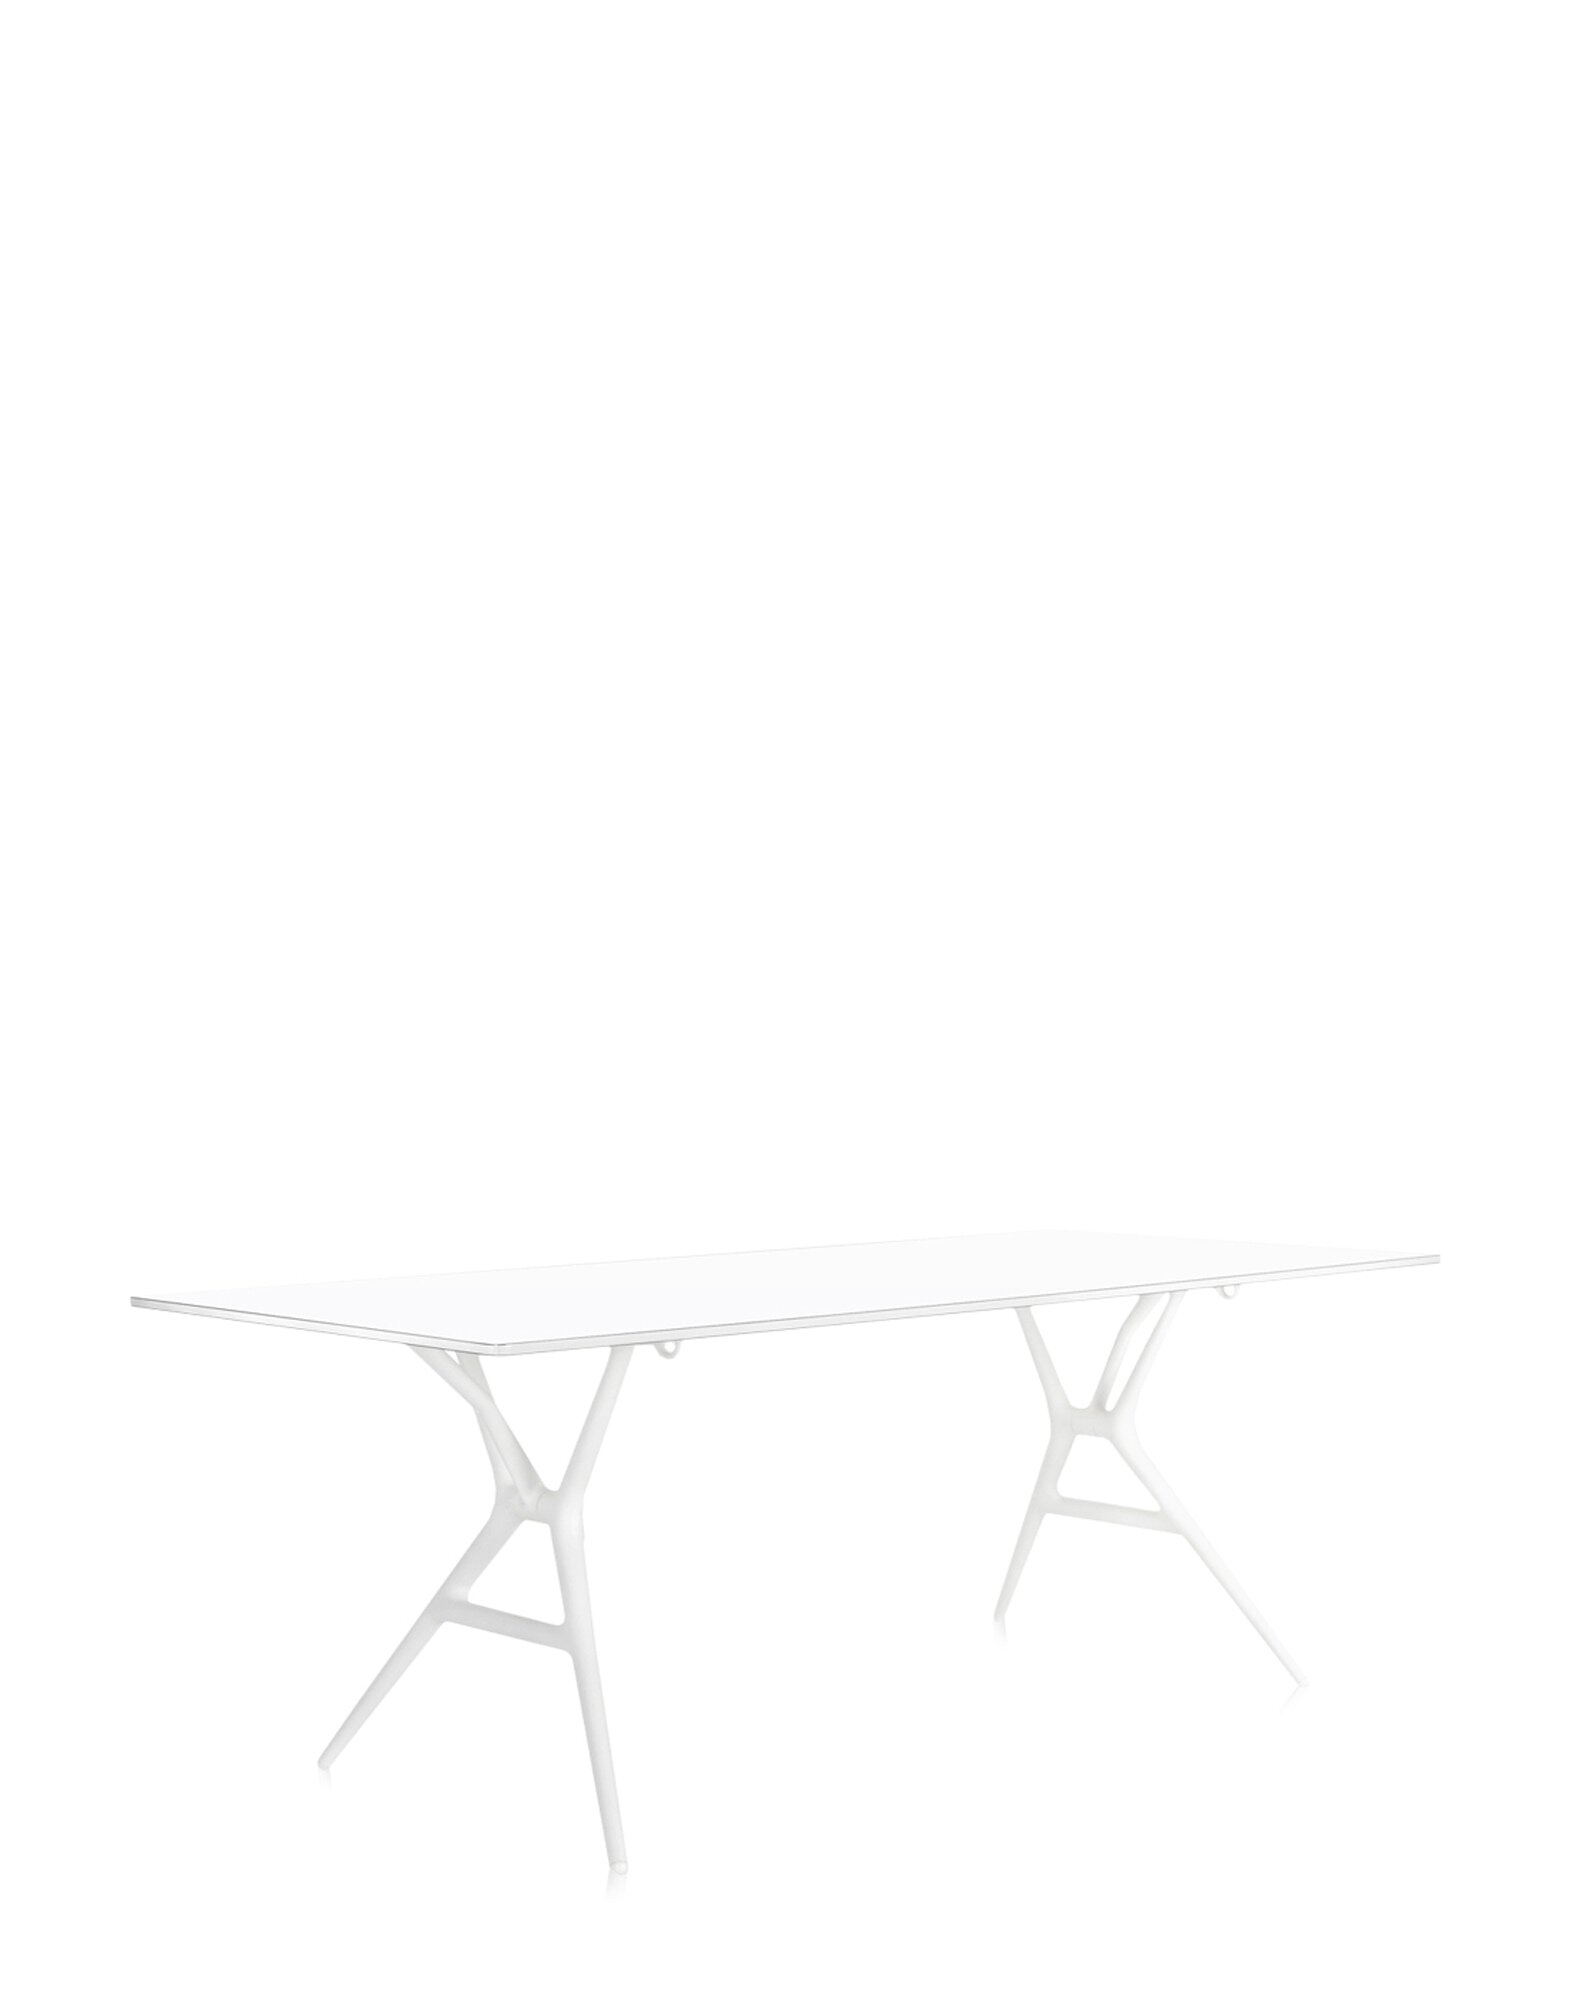 Jurni Multi-Purpose Table with Post Leg and Casters